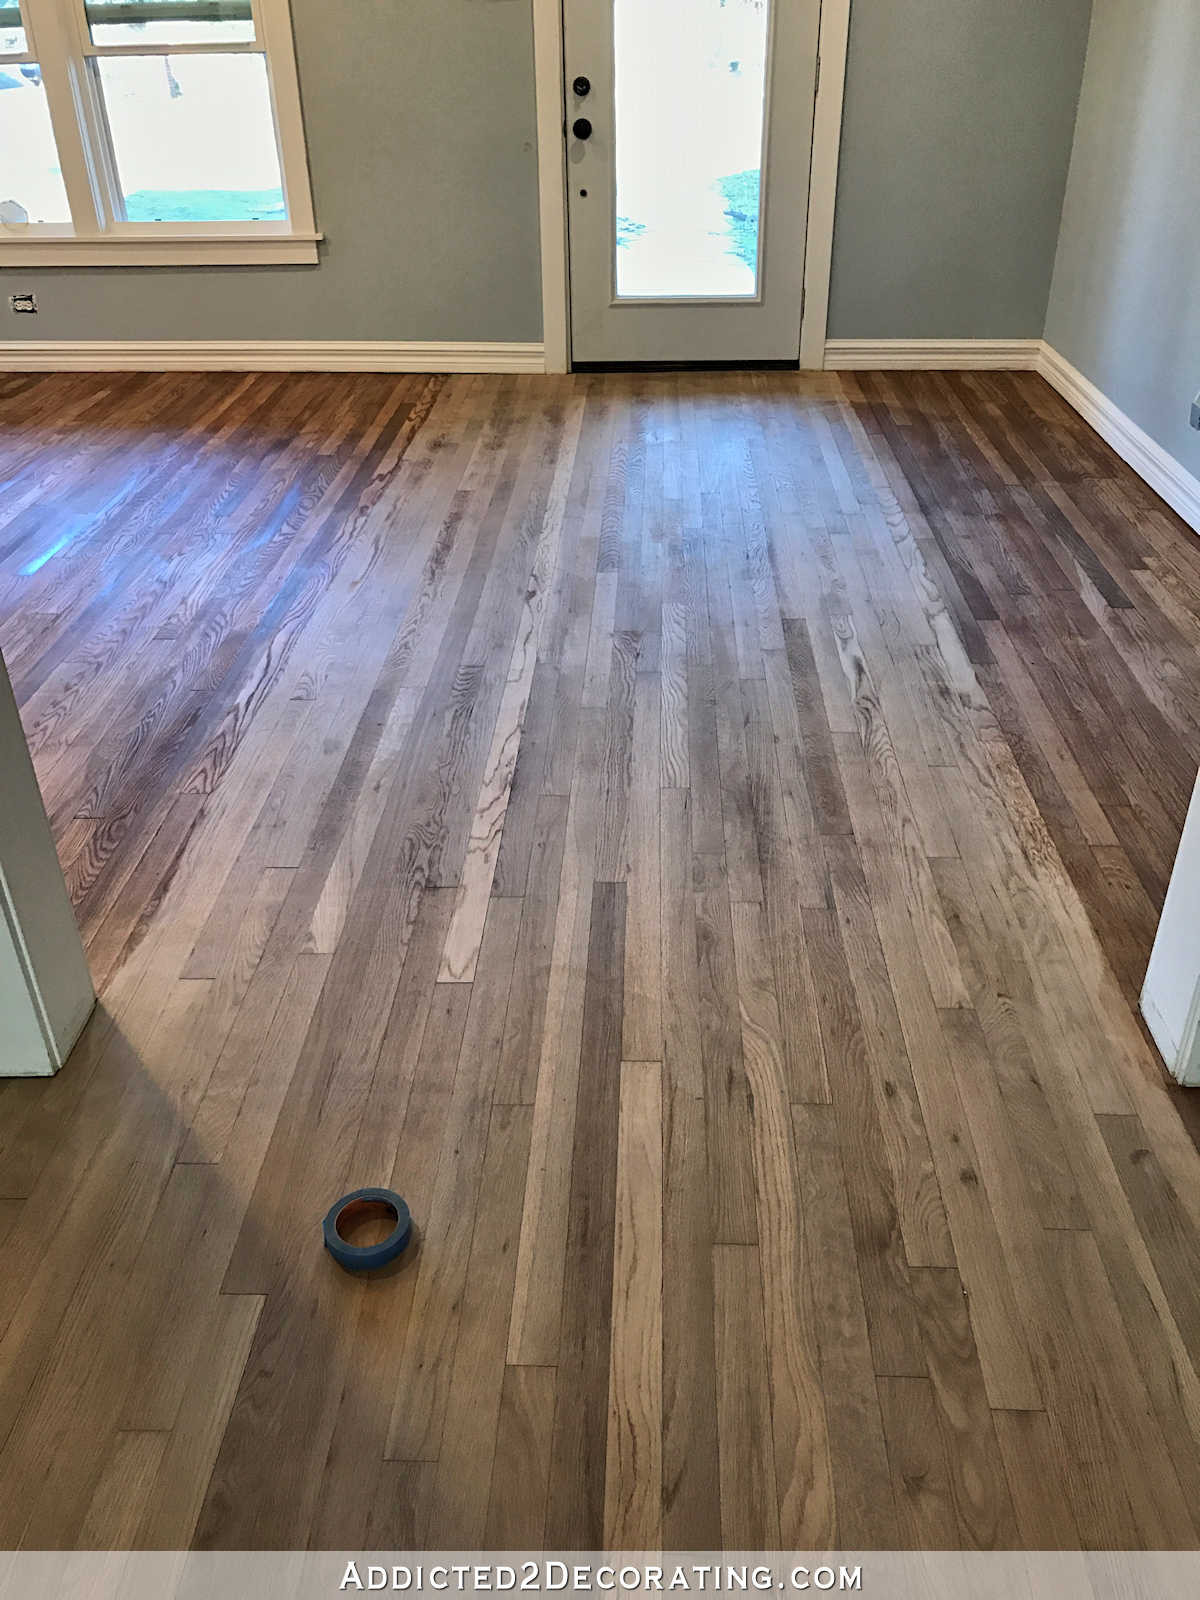 21 Spectacular Hardwood Floor Color Trends 2018 2024 free download hardwood floor color trends 2018 of adventures in staining my red oak hardwood floors products process pertaining to staining red oak hardwood floors 4 entryway and living room wood conditio